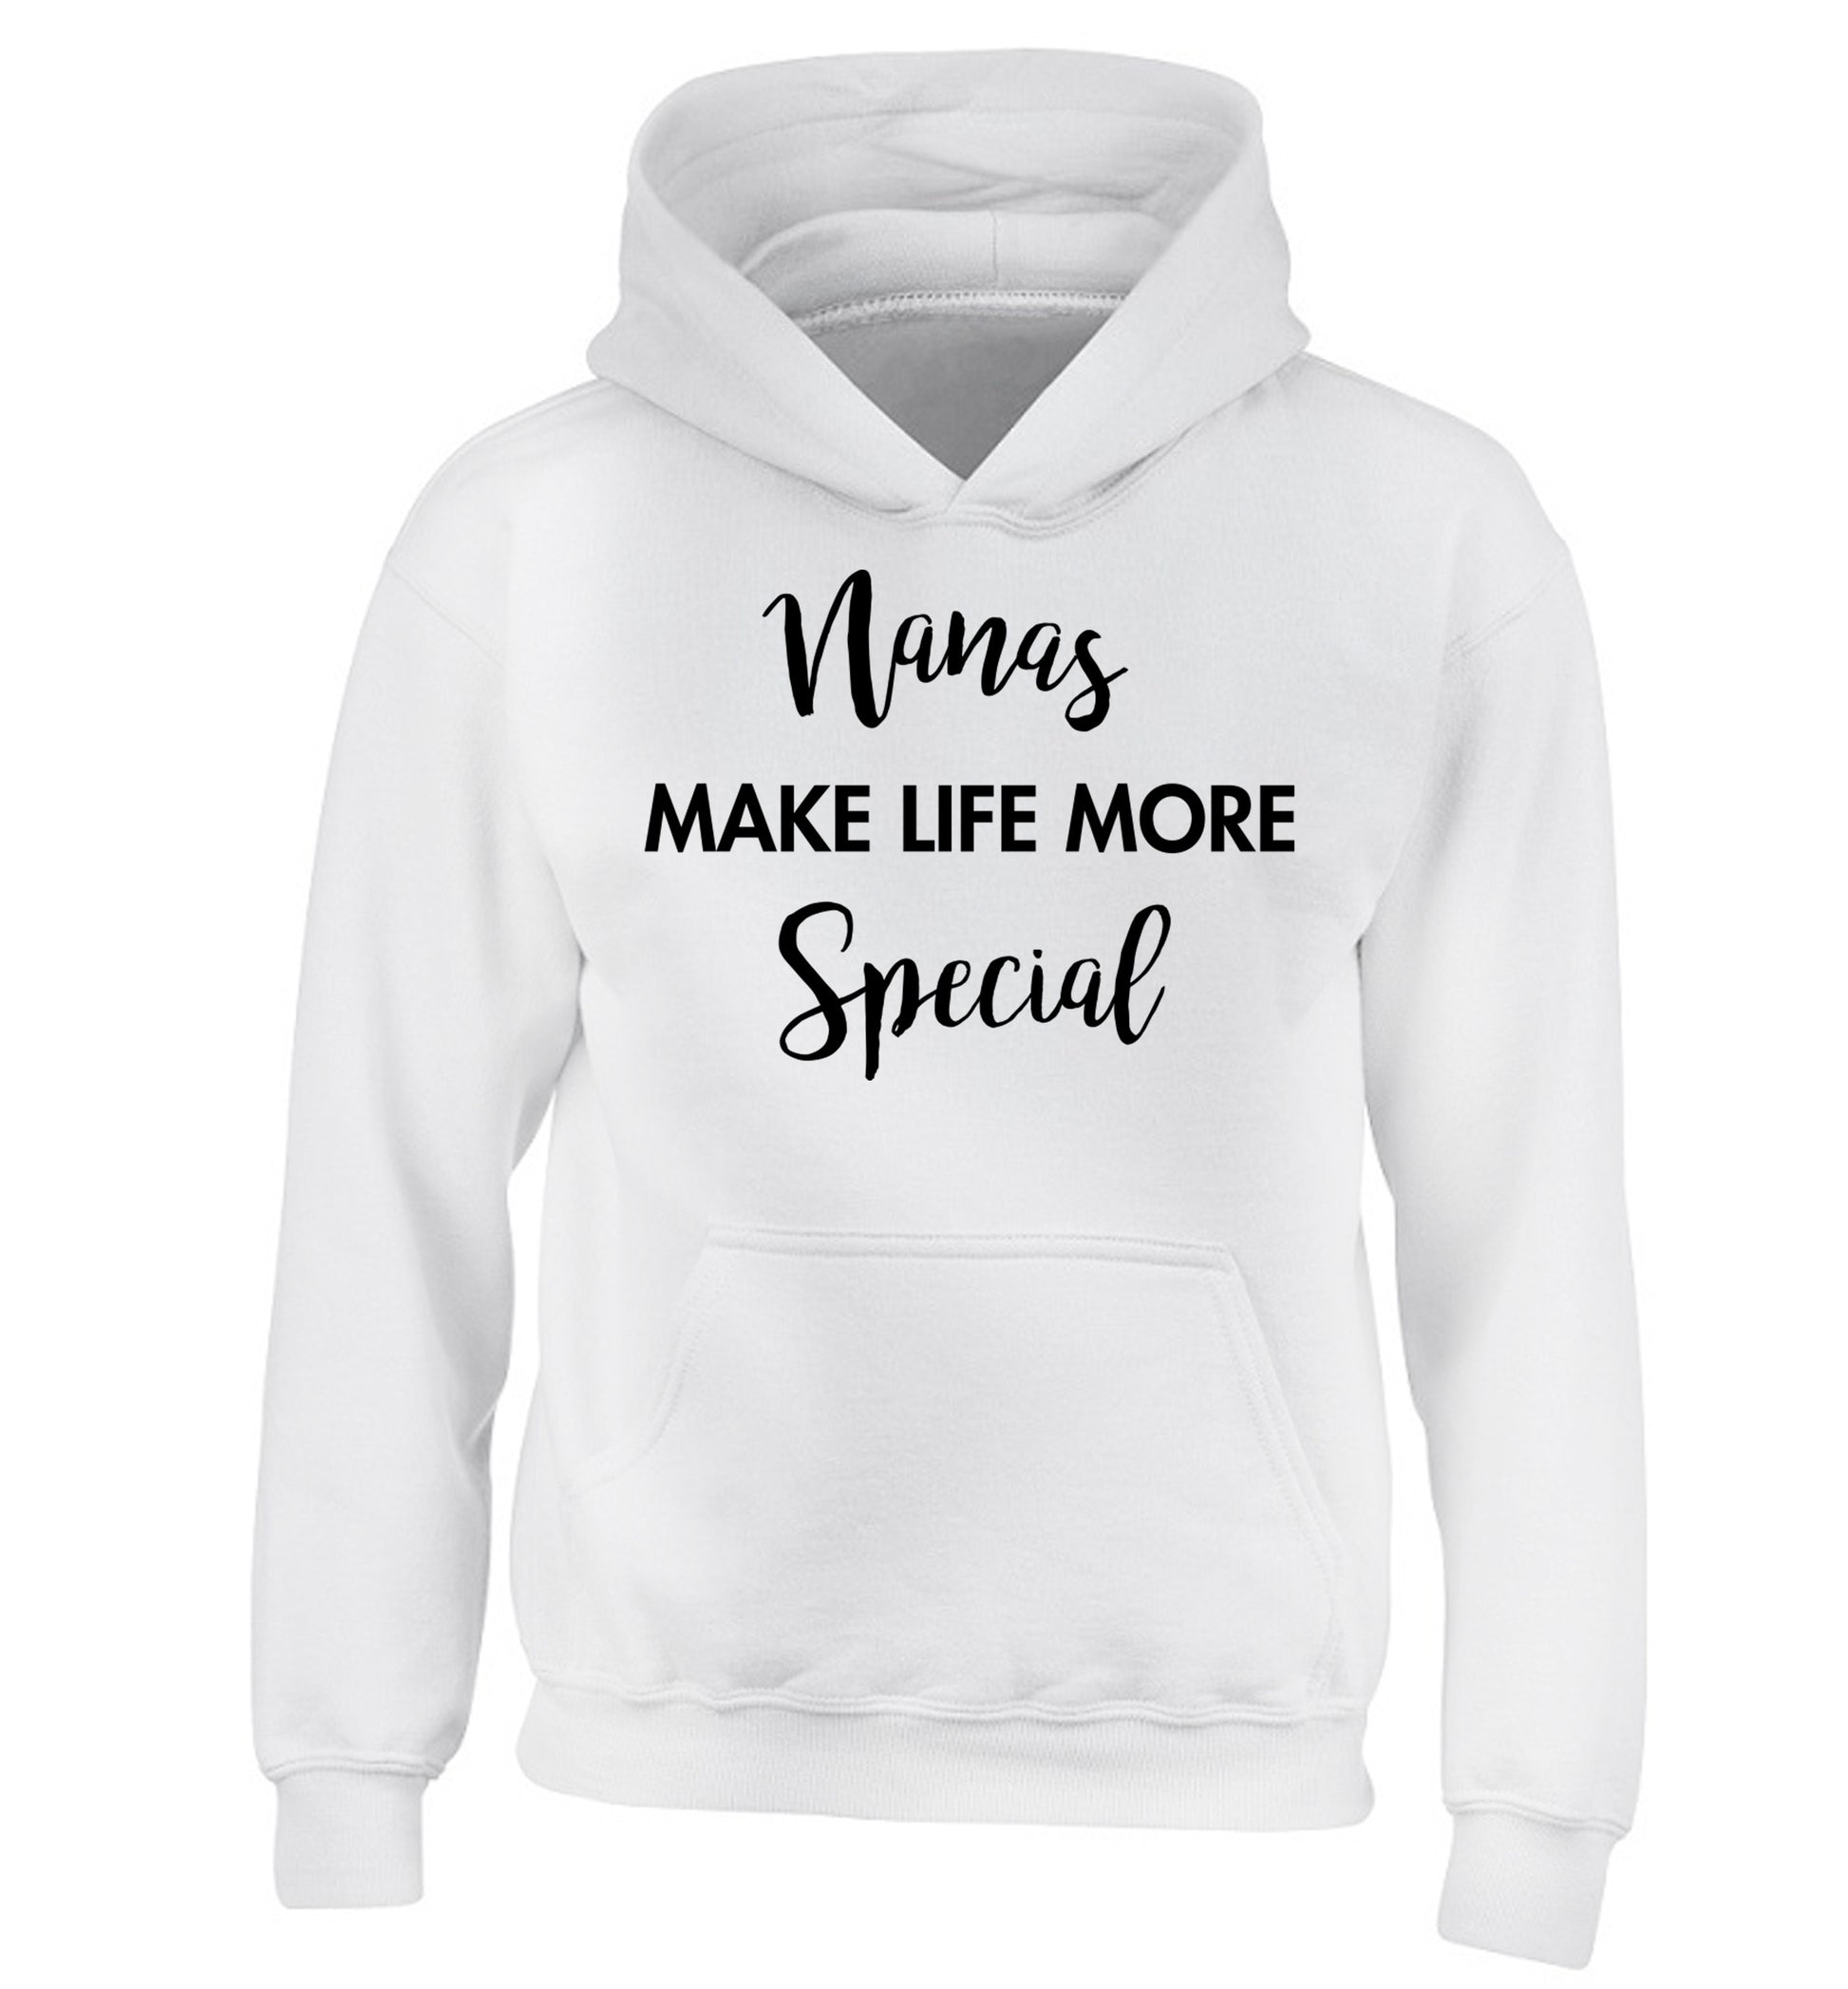 Nanas make life more special children's white hoodie 12-14 Years